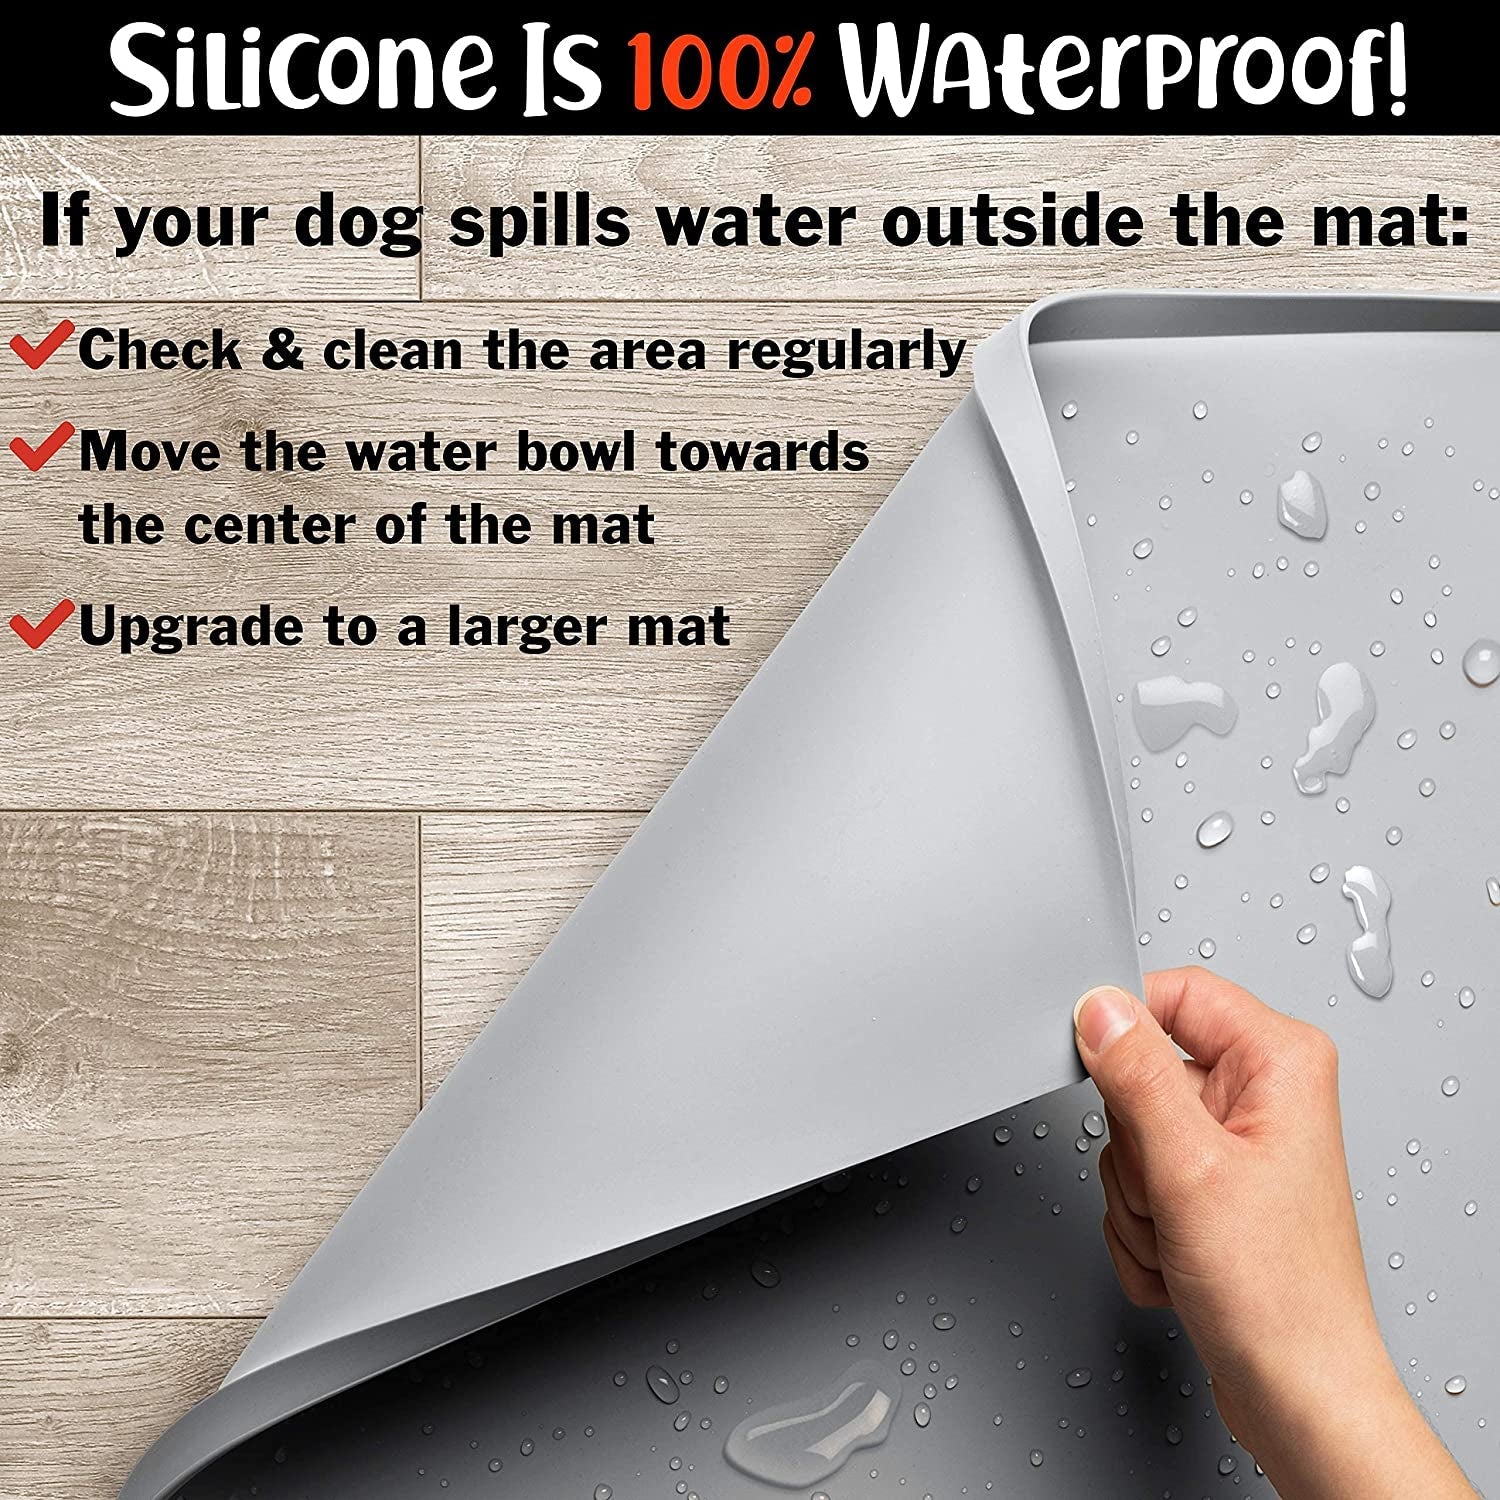 Dog Food Mat, Waterproof Dog Bowl Mat, Silicone Dog Mat for Food and Water, Pet Food Mat with Edges, Dog Food Mats for Floors, Nonslip Dog Feeding Mat, Puppy Supplies - Large (24X16), Mist - PETGS